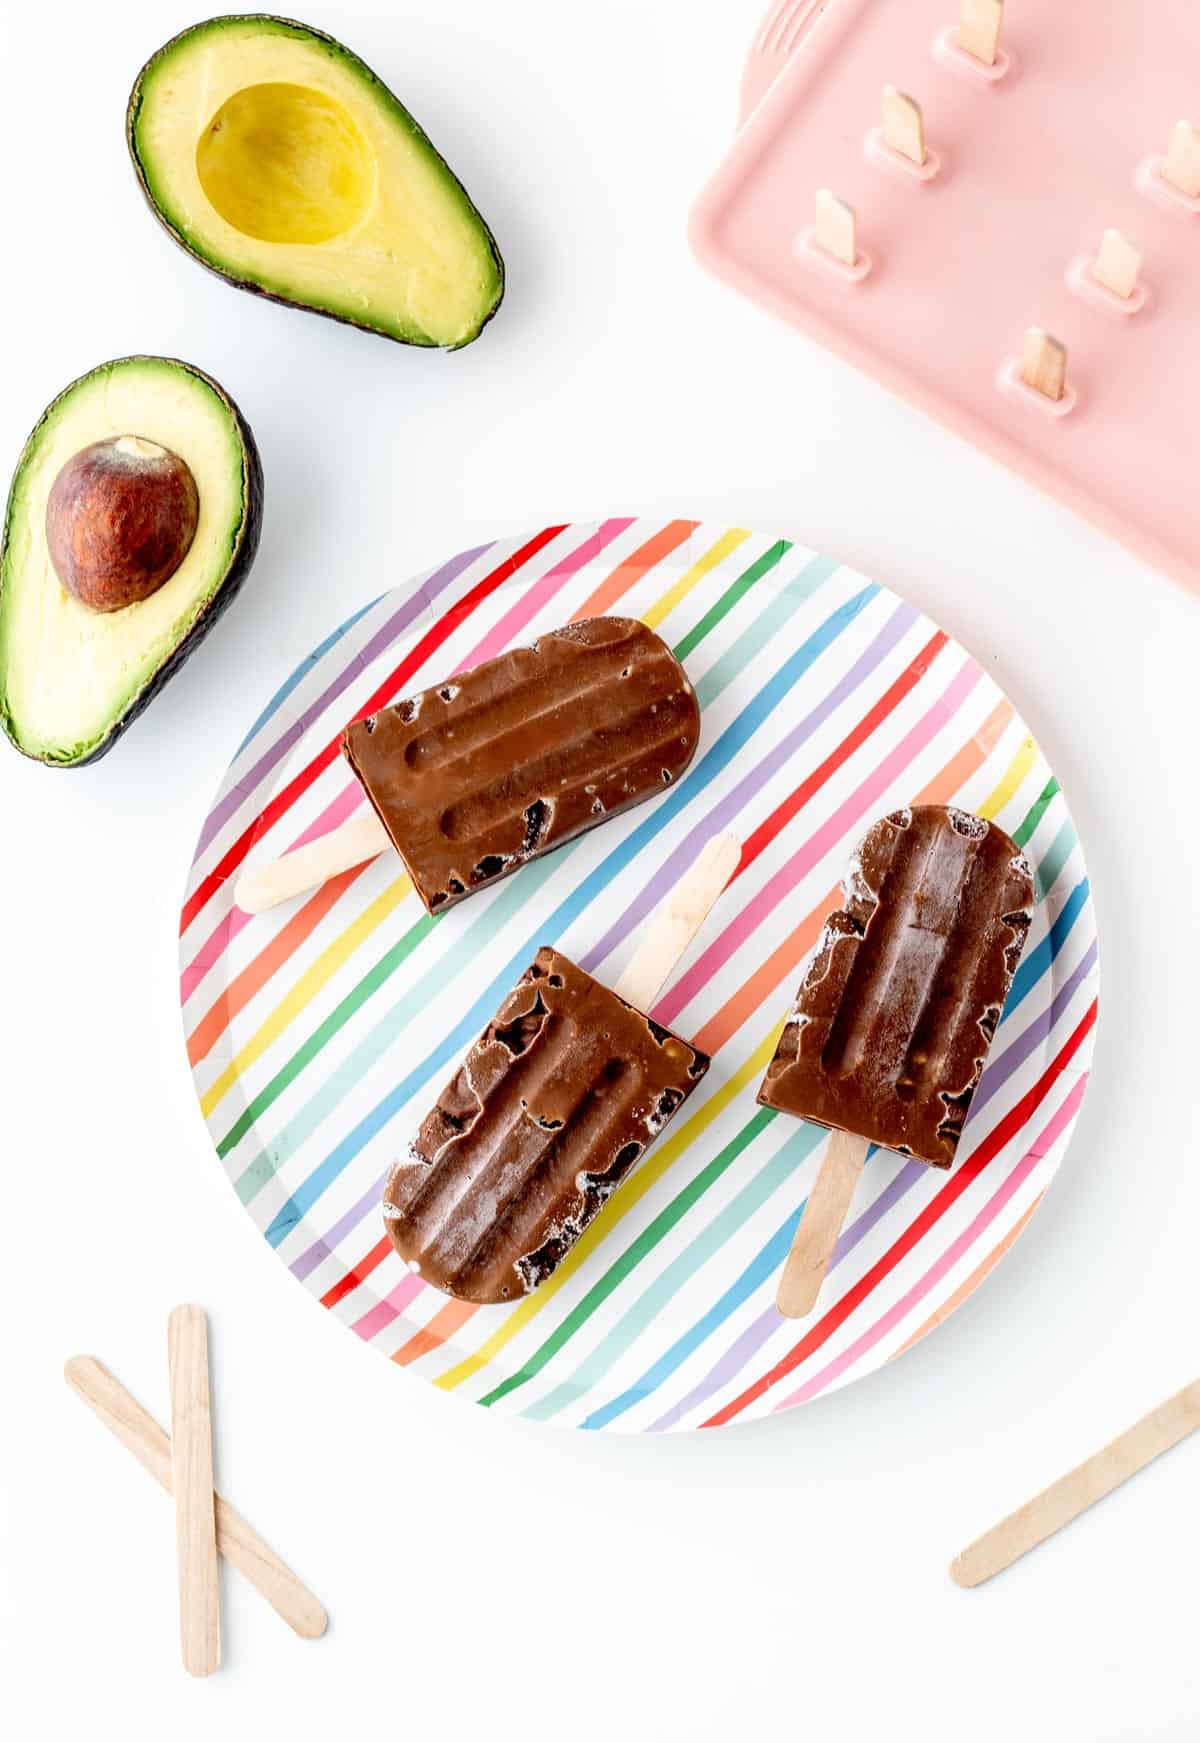 Three chocolate avocado popsicles on a colorful striped plate on a counter.